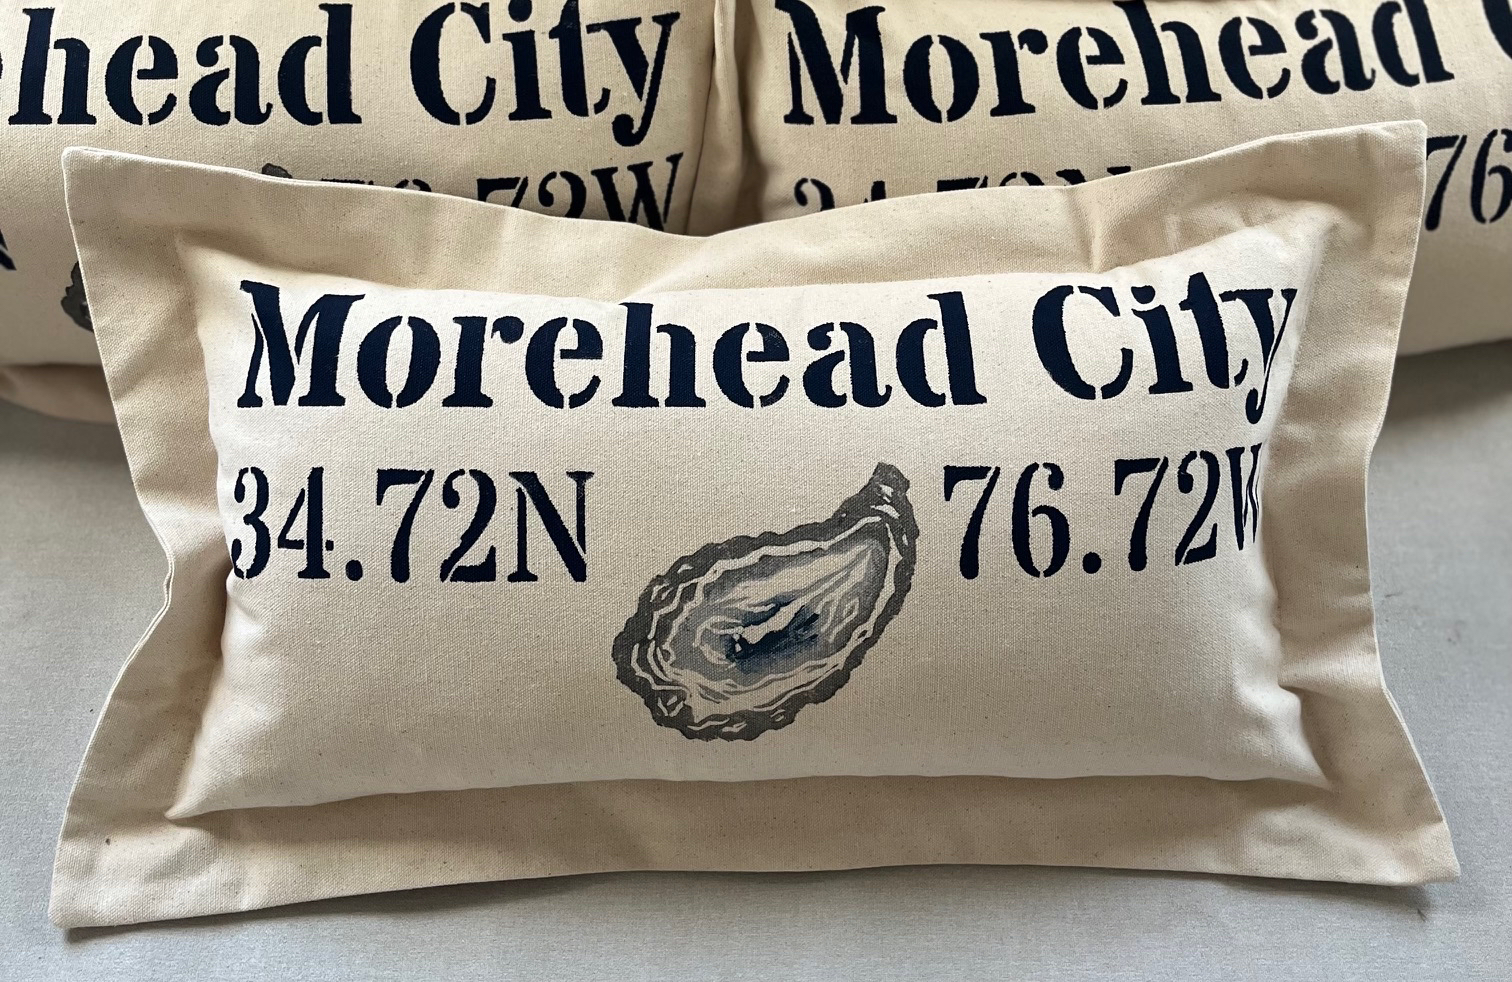 Morehead City NC Coordinates Oyster Pillow